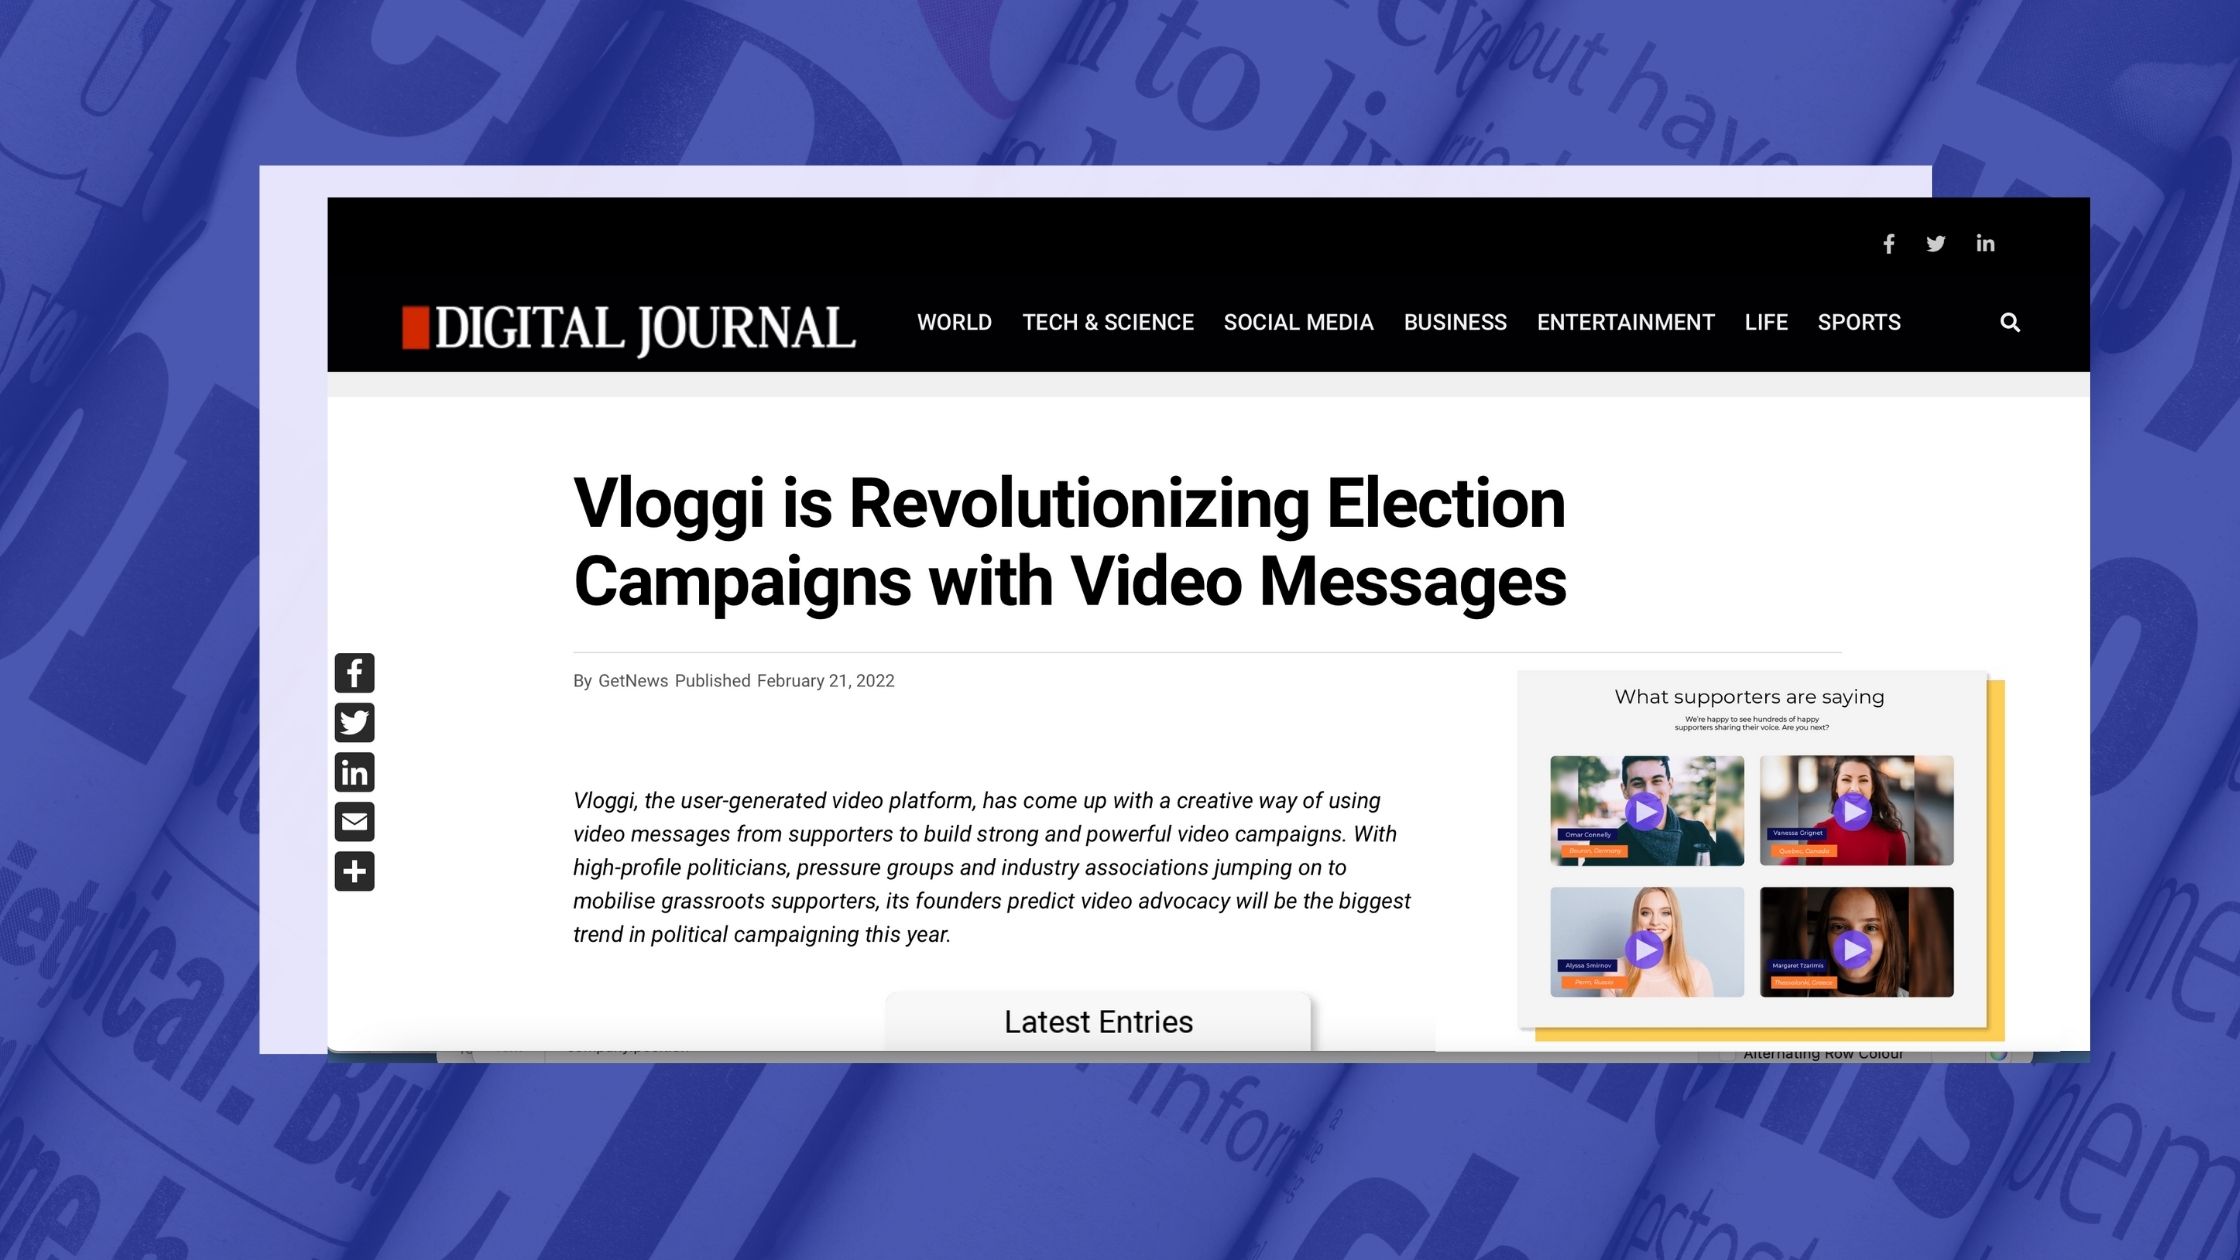 Vloggi is Revolutionizing Election Campaigns through Video - Digital Journal article